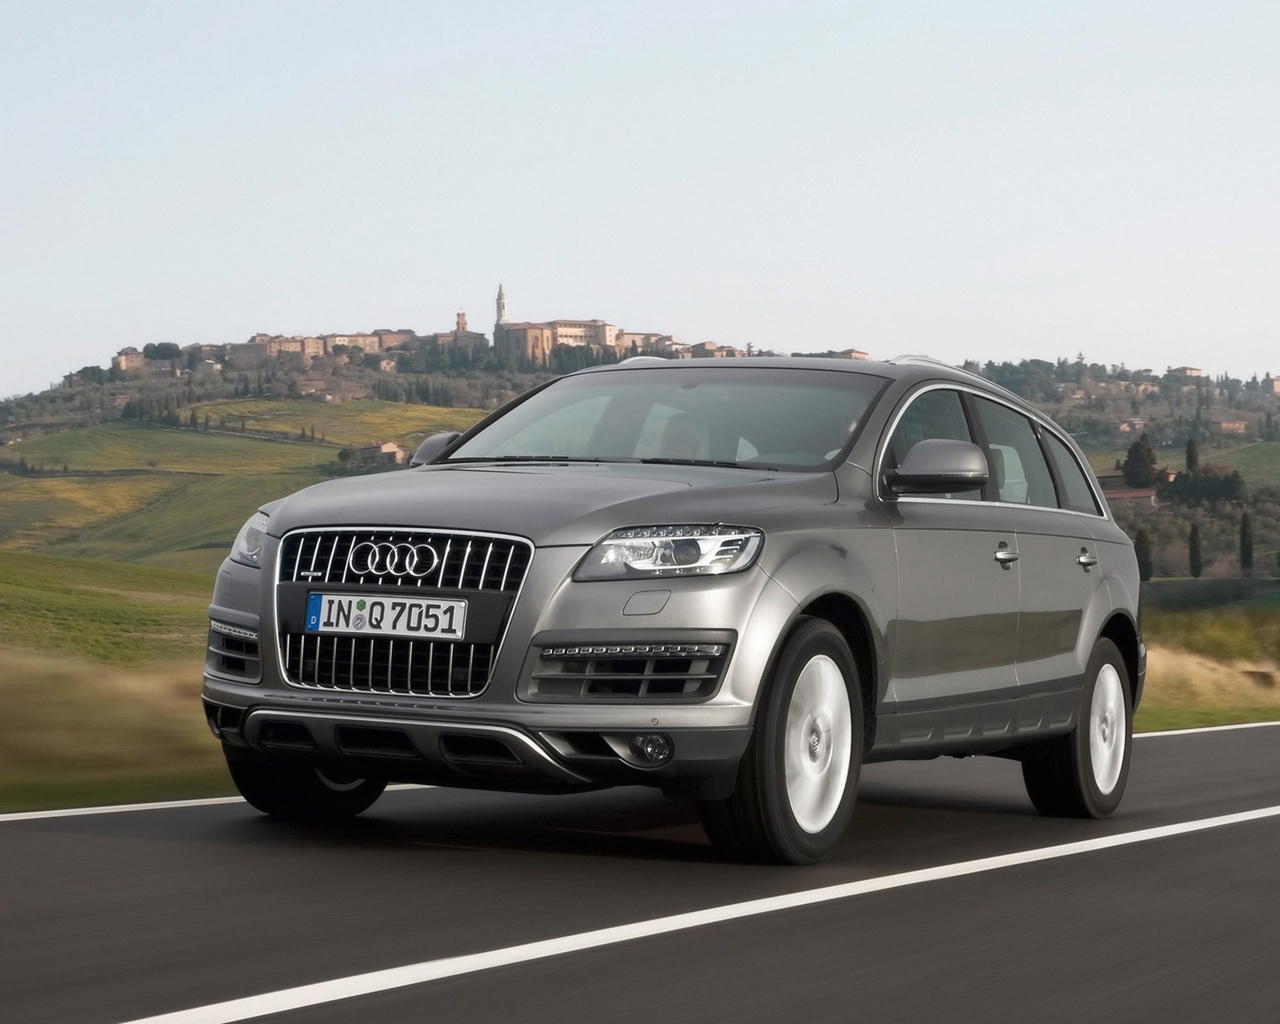 2009 Audi Q7 - Grey Front Angle Speed 1 for 1280 x 1024 resolution